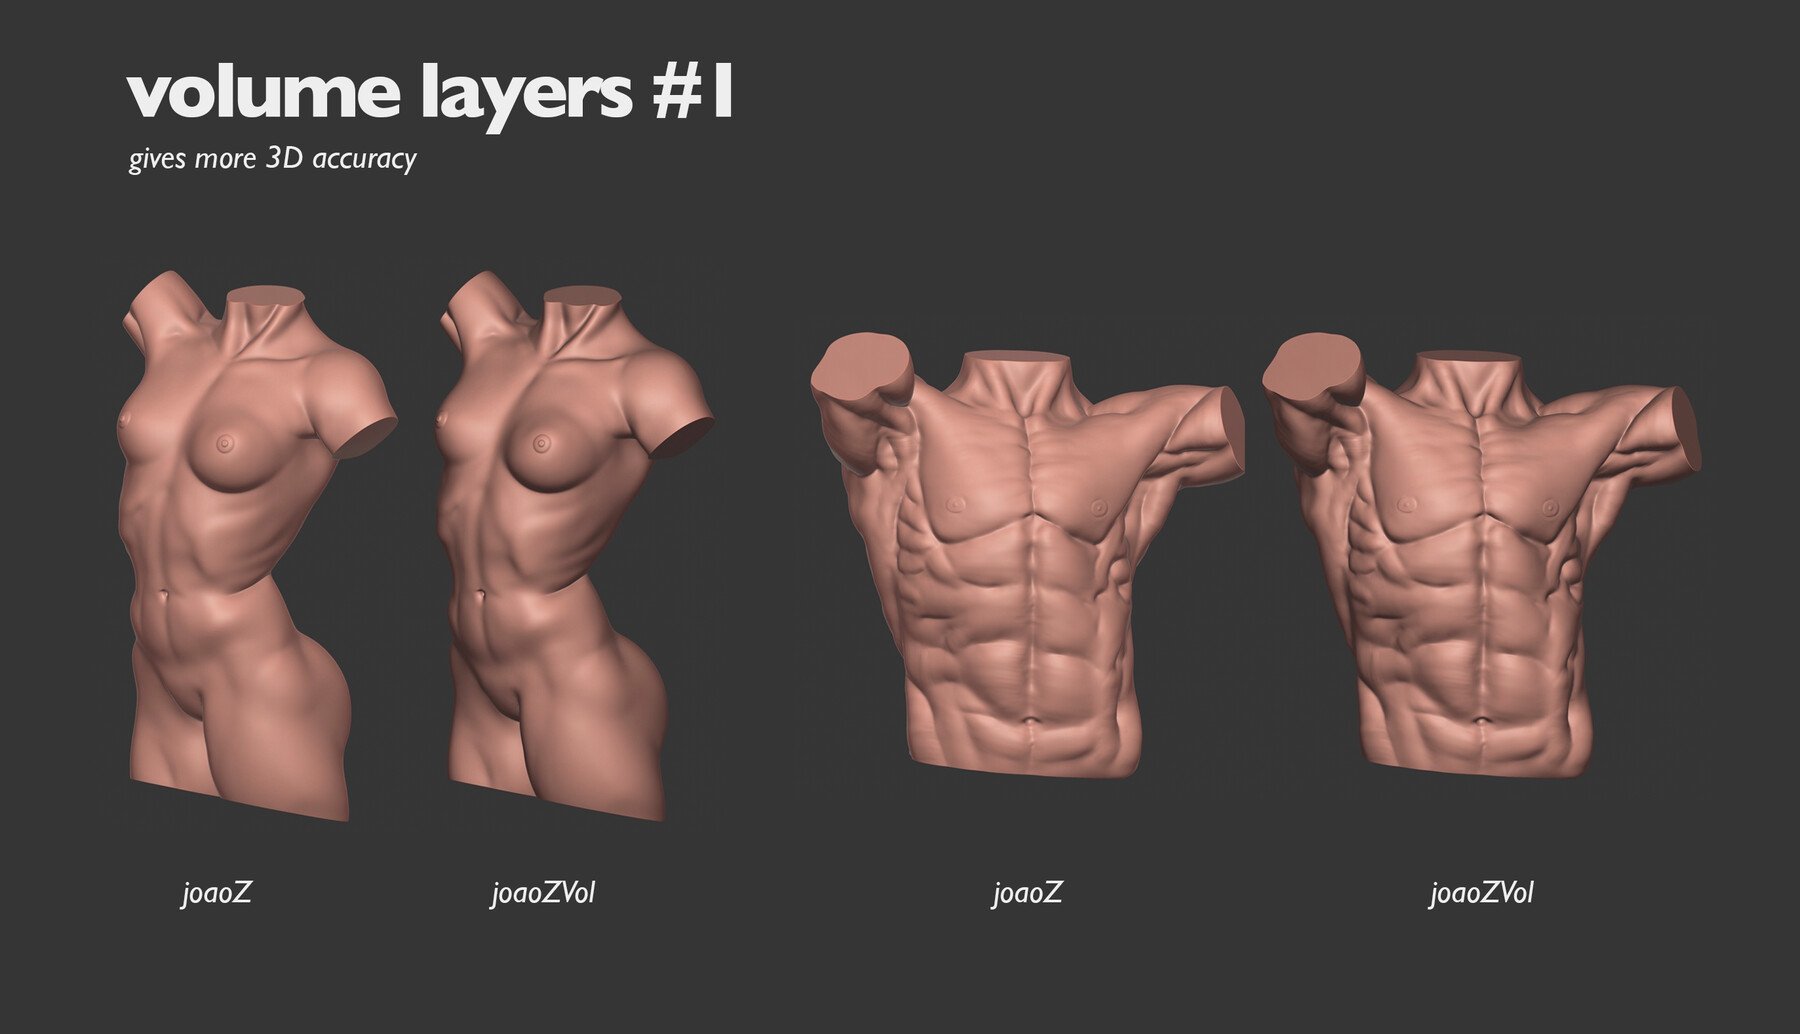 zbrush materials pack